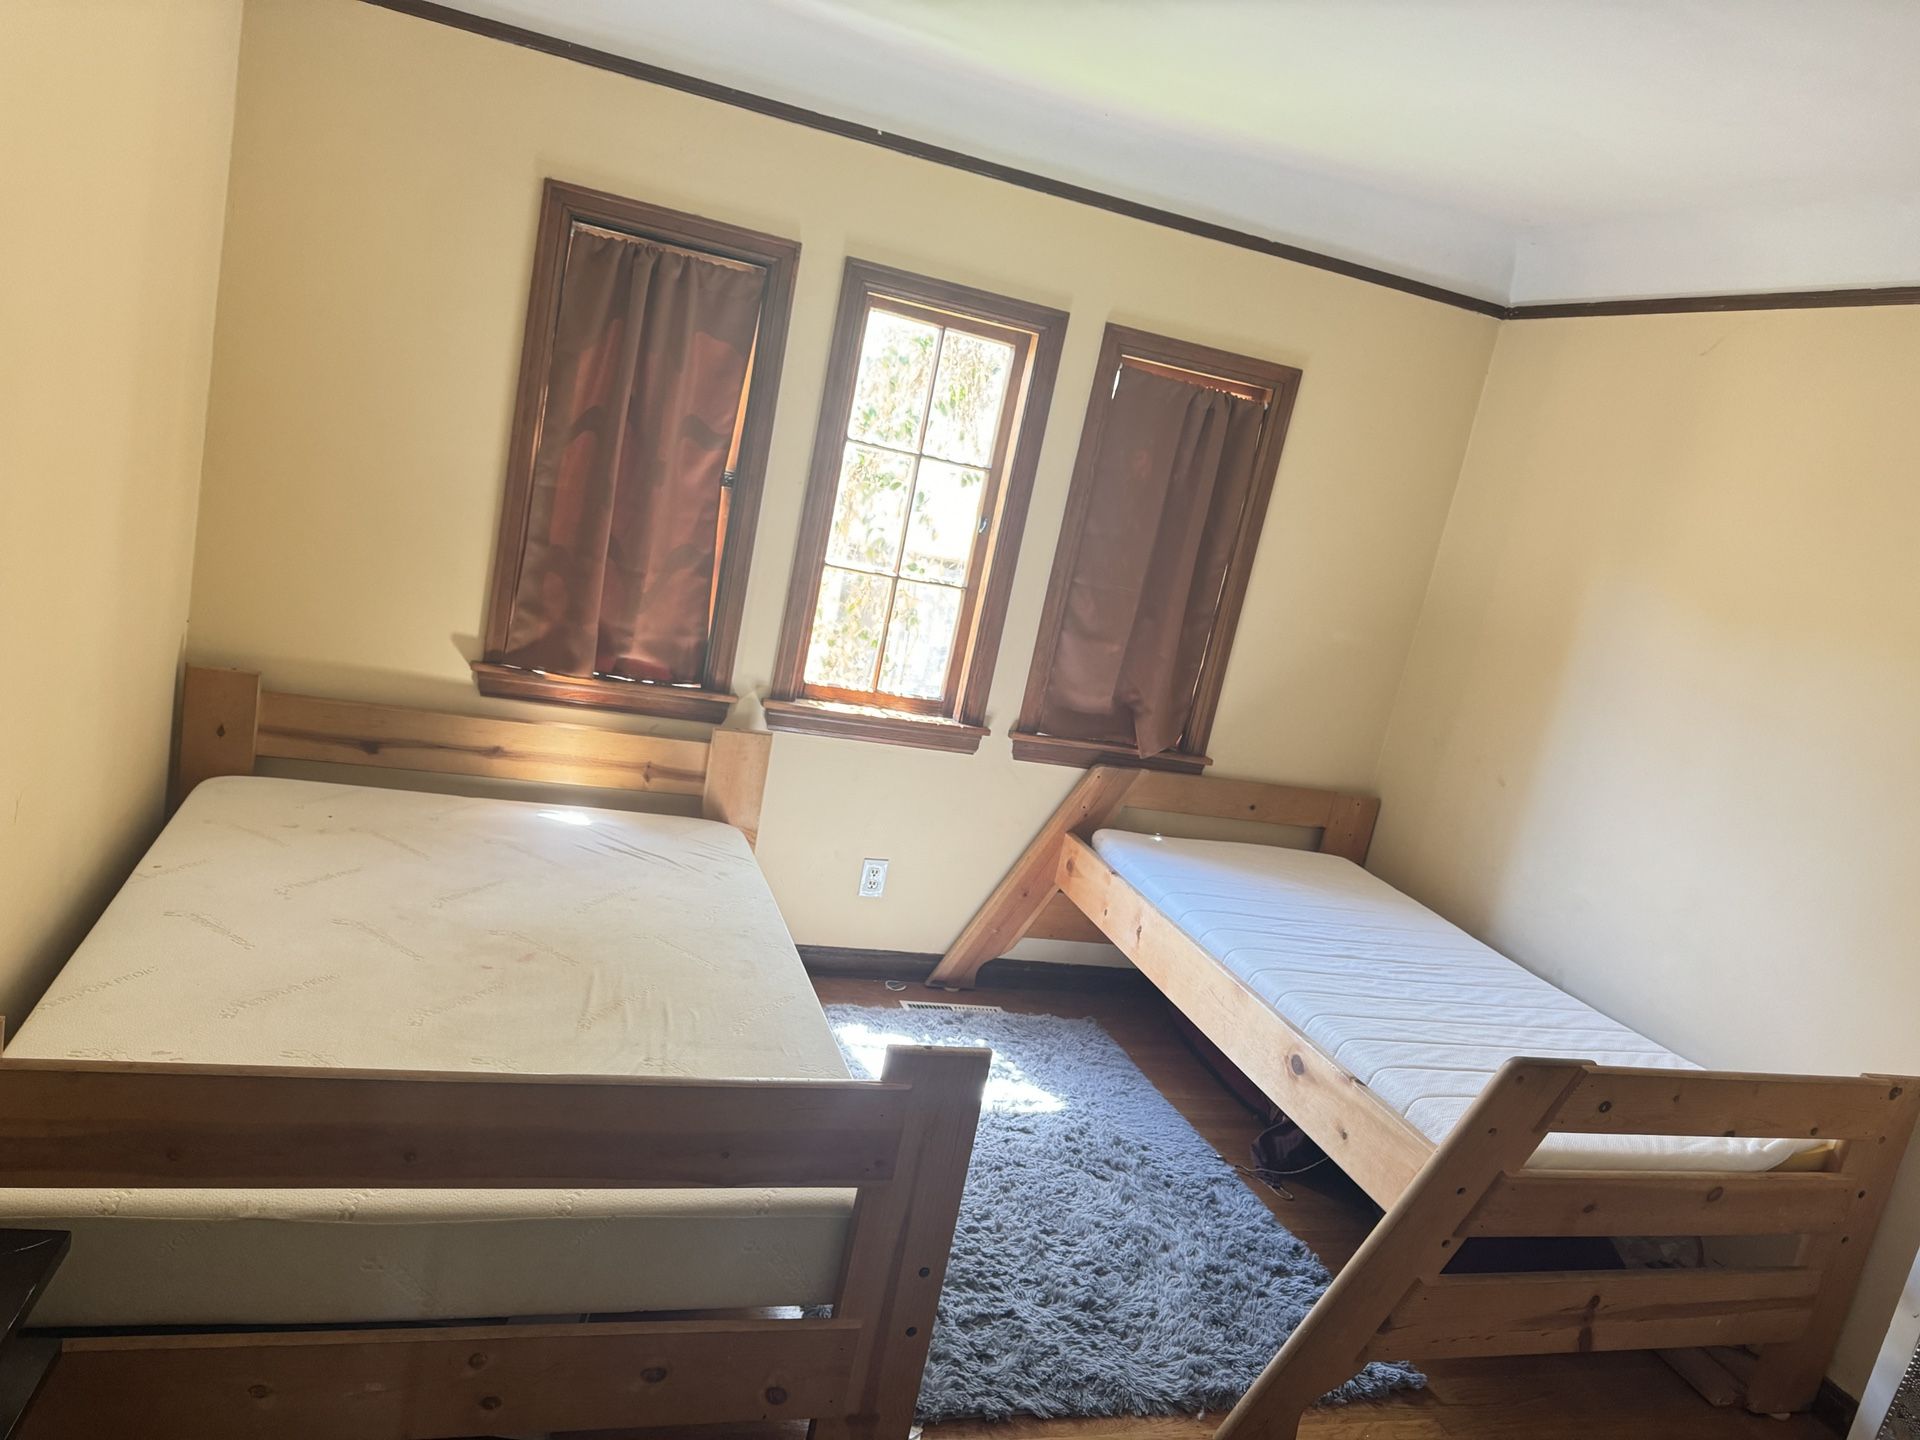 One Full-Size One, Twin Bed With The Mattress